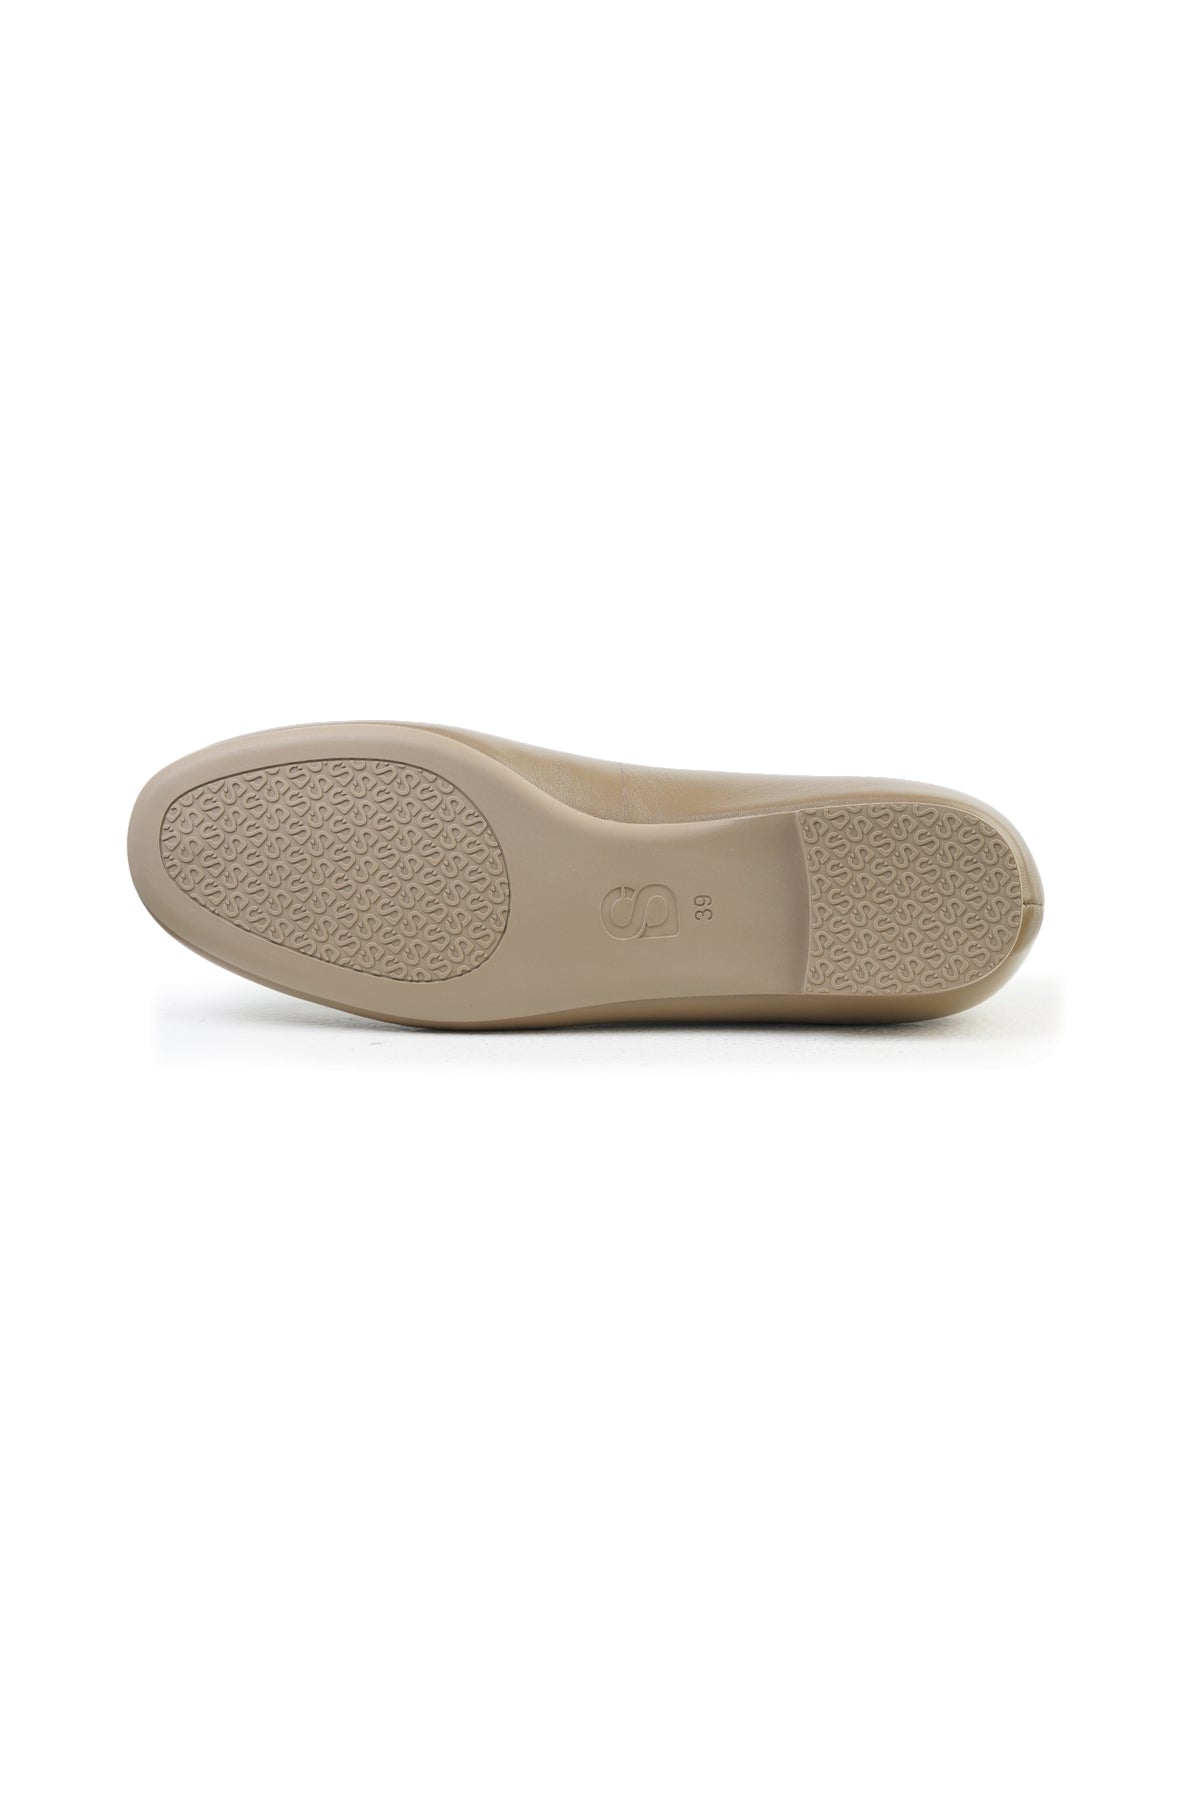 Cera Shoes - Taupe